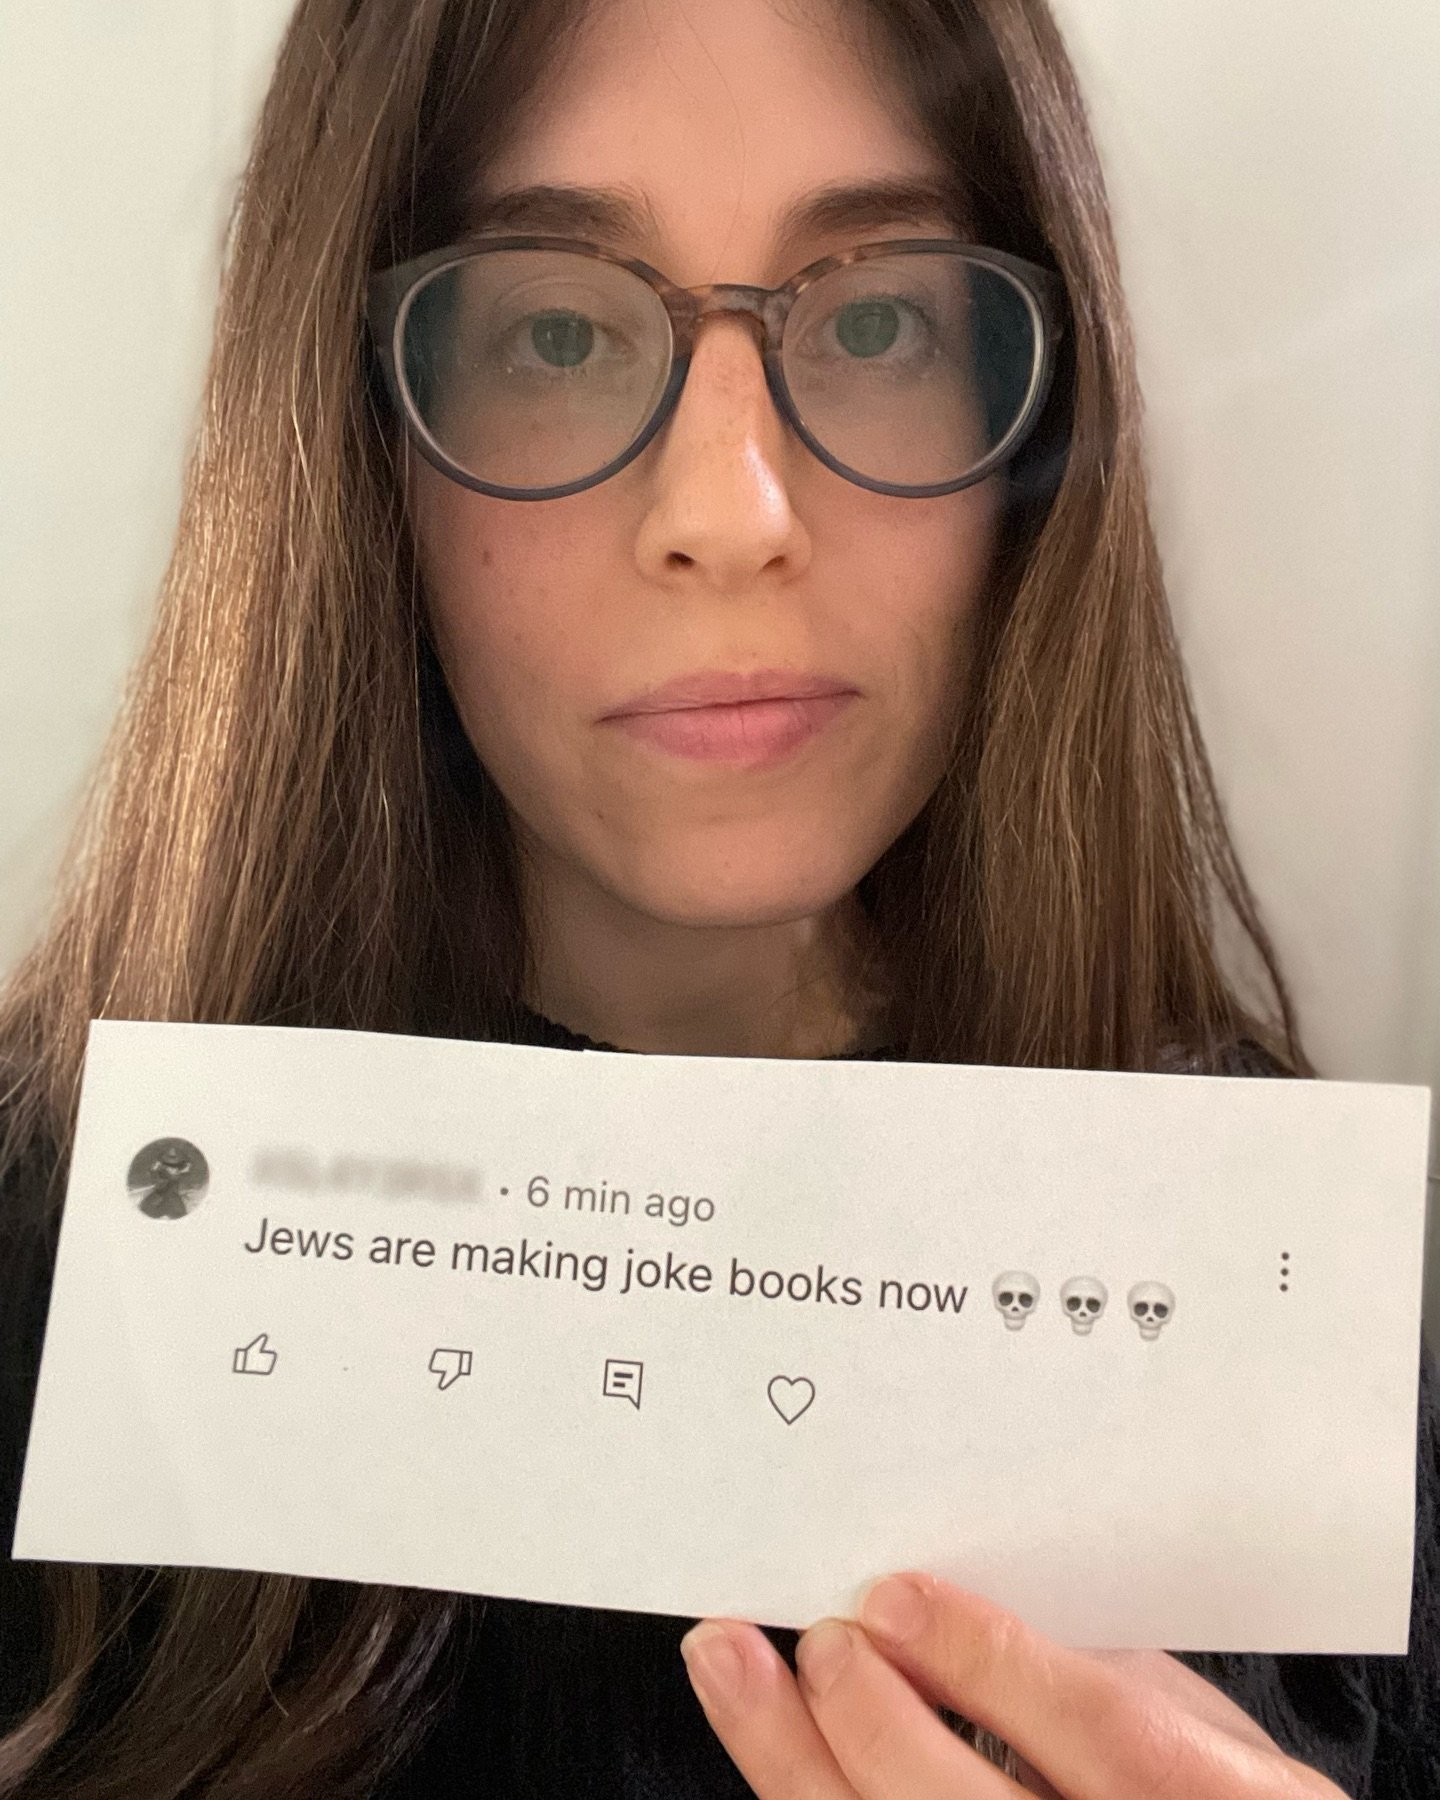 I stand with Jewish youth against all forms of antisemitism. Antisemitic comments have no place in a healthy and free society. 

I nominate @yourjewishlife and @elicomedyagram to join this campaign and show unity with all those who have been deeply a